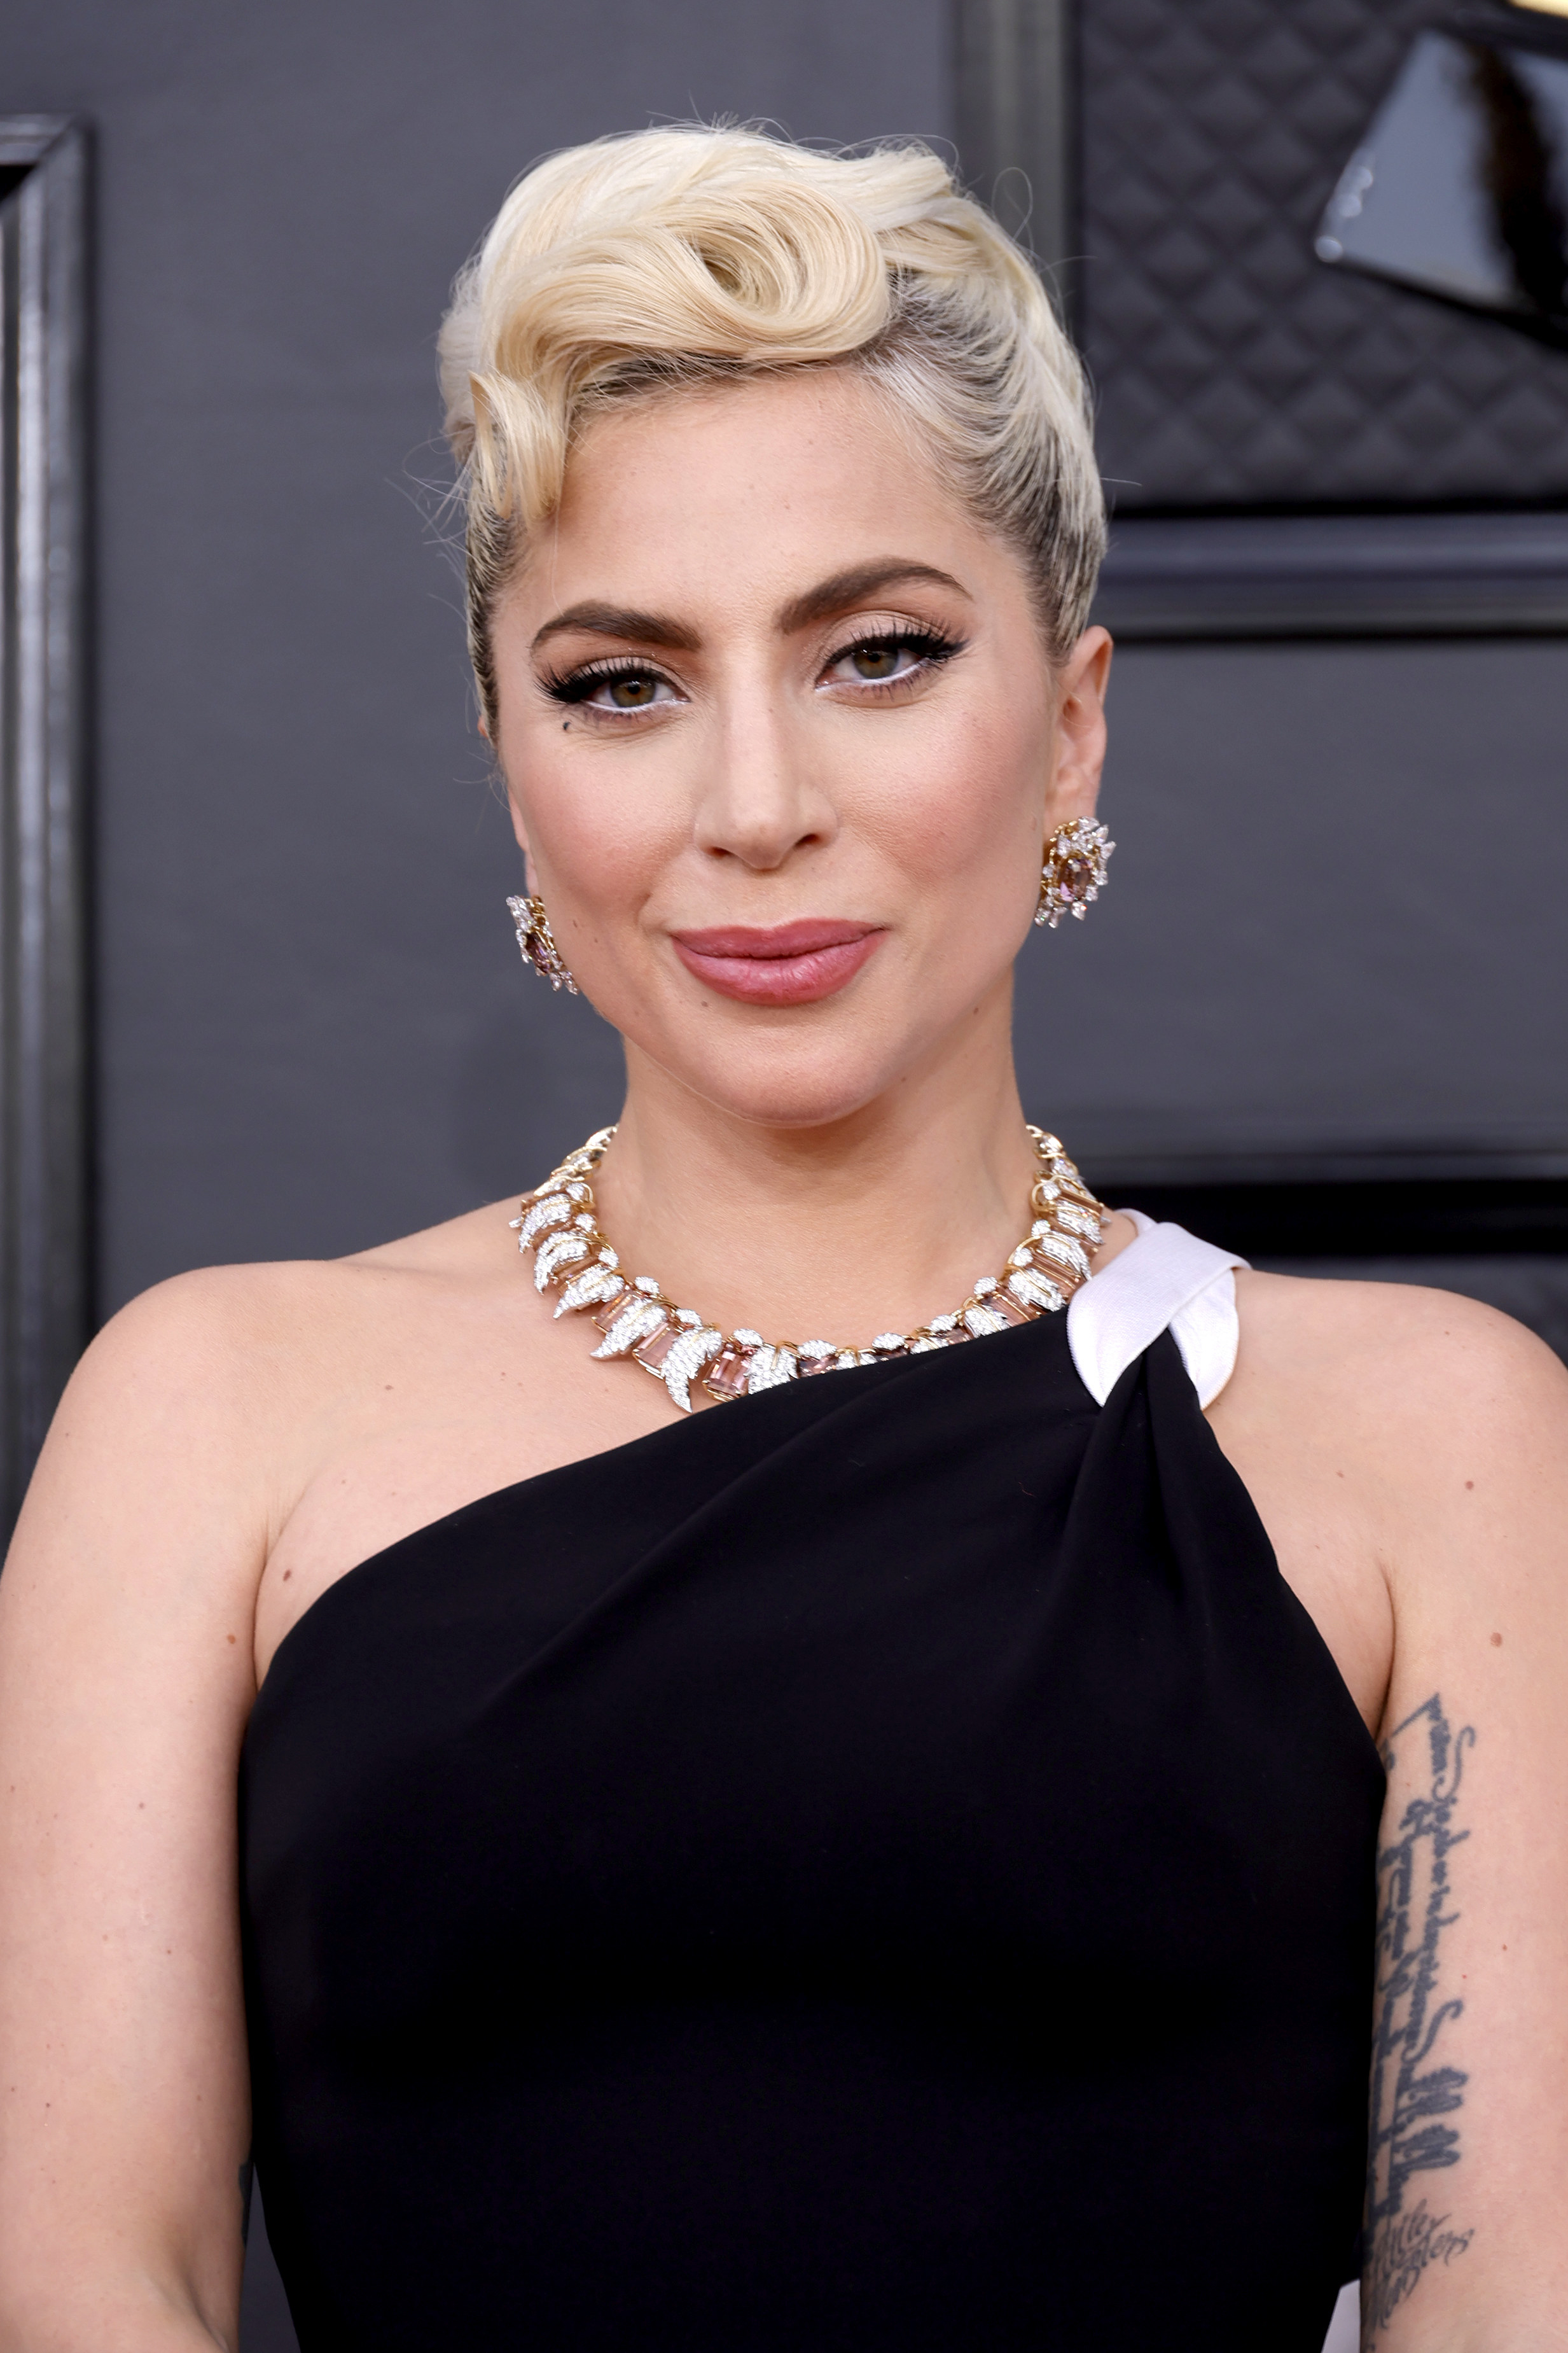 A closeup of Gaga rocking a one-shouldered outfit on the red carpet and her hair in a glam updo